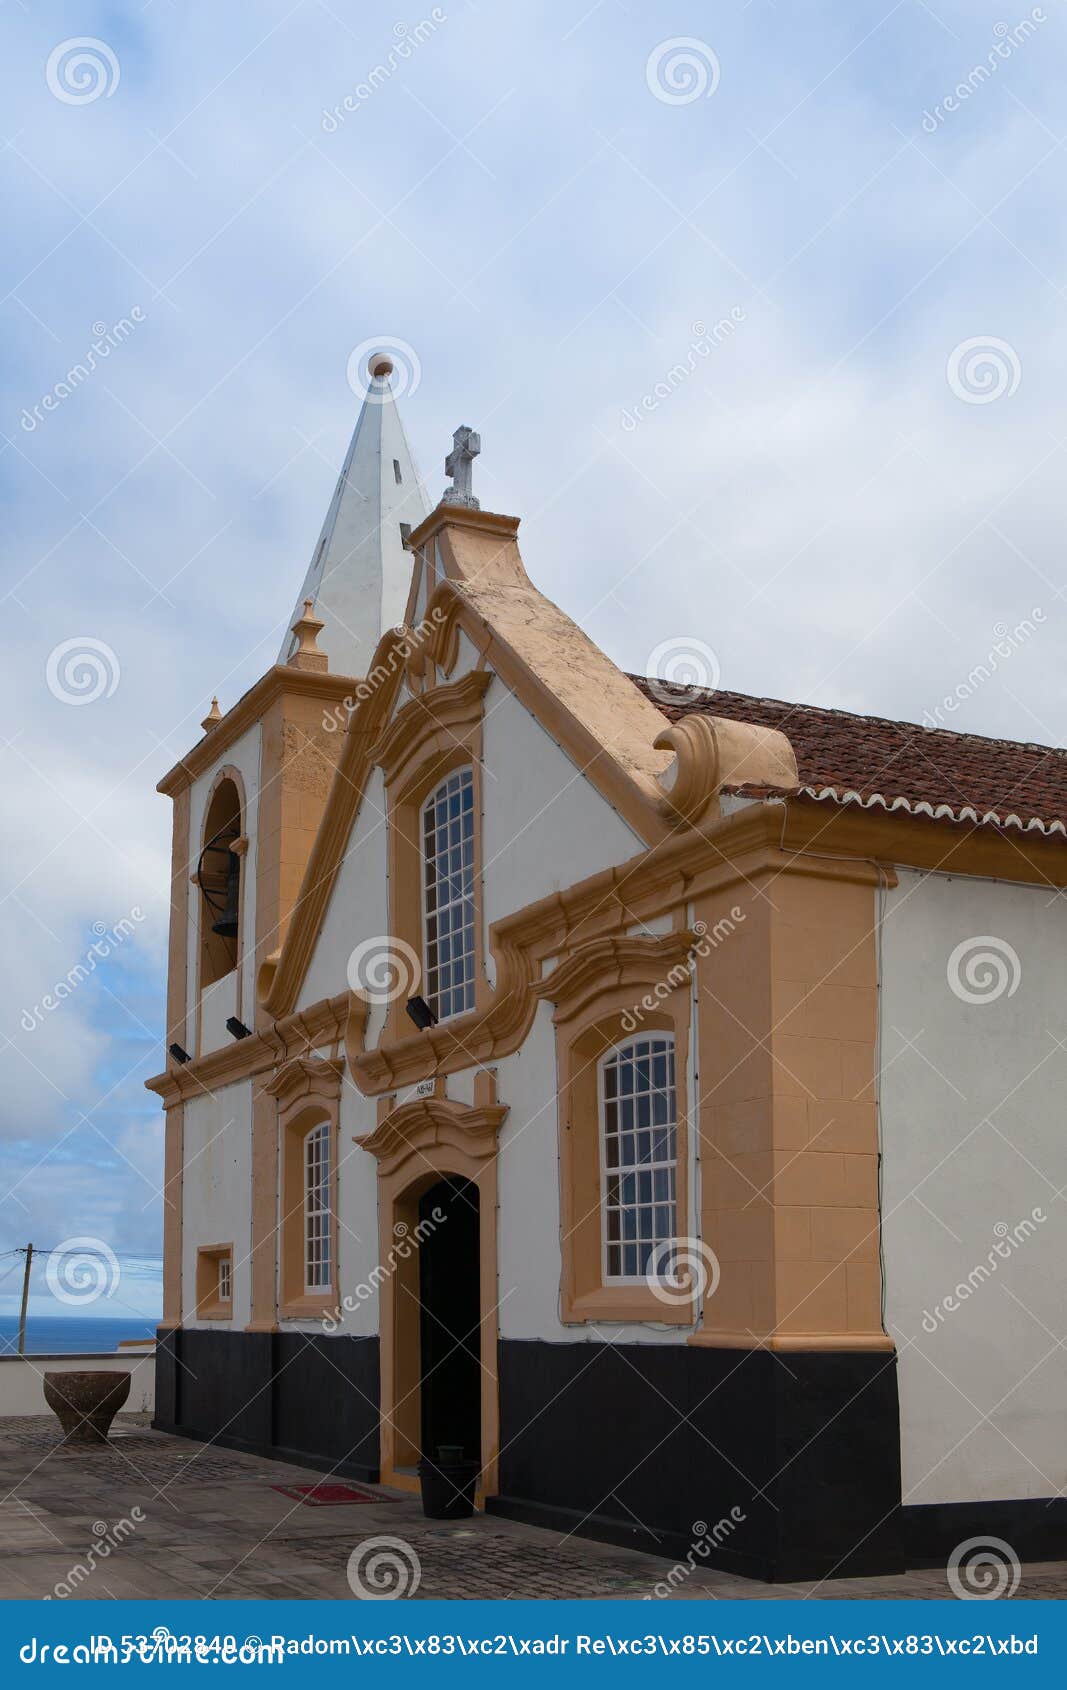 small church named imperio in terceira